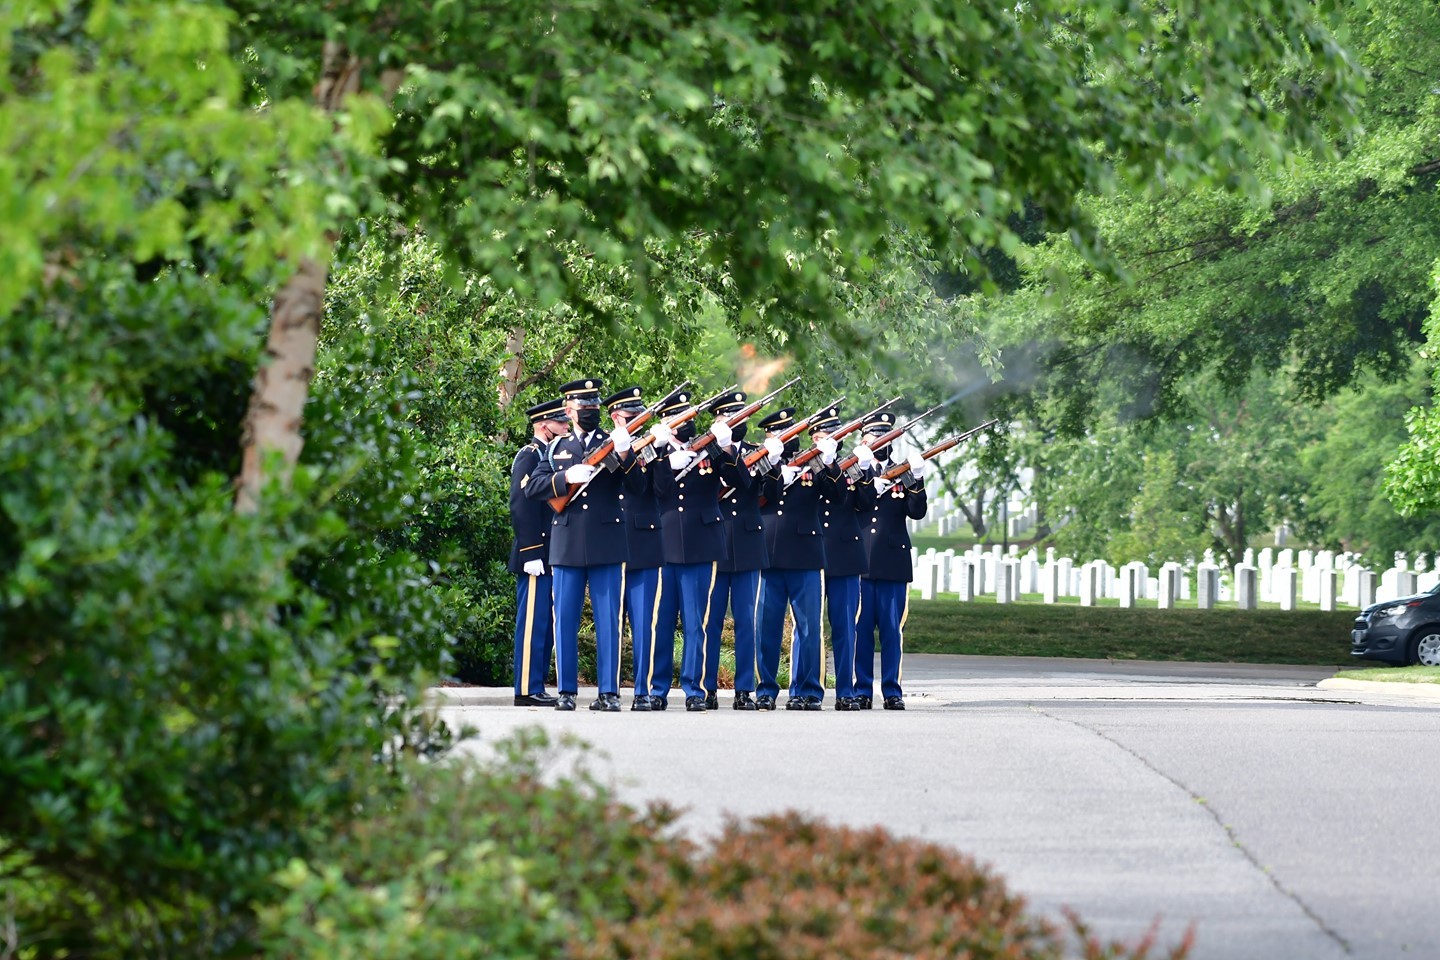 A US Army Firing Party firing three volleys at Arlington National Cemetery as captured by the @arlingtonmedia team. 

A three round volley is the honor bestowed upon anyone that has served honorably in the US Armed Forces and is buried in the cemetery here at Arlington.  This differs slightly from a 21 gun salute, but when conducted by a party of 7 riflemen, it does equal 21 rounds fired. 

These rounds are later collected and given to family members in honor of their loved ones.